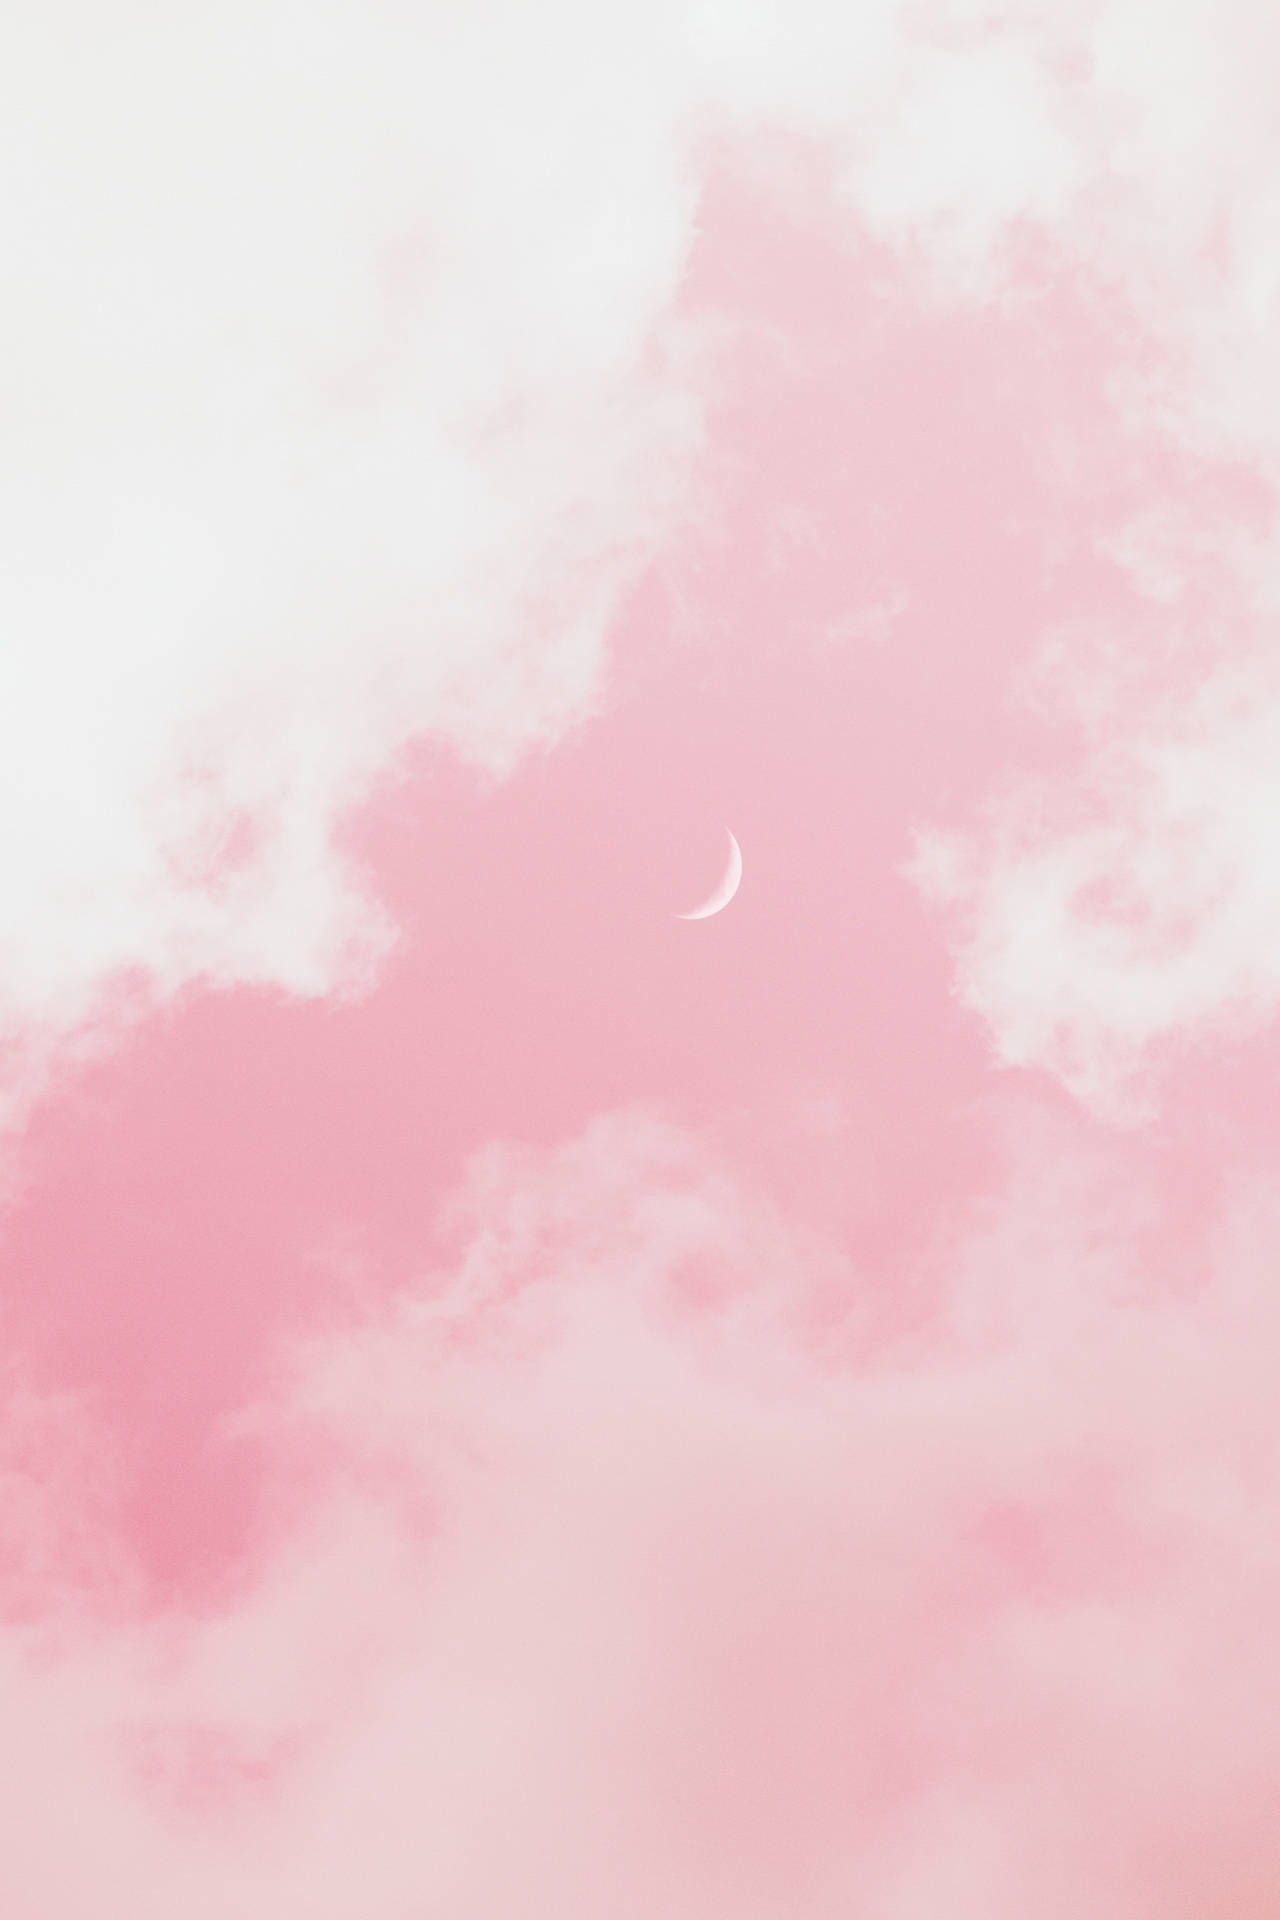 1888X2832 Pink Aesthetic Wallpaper and Background